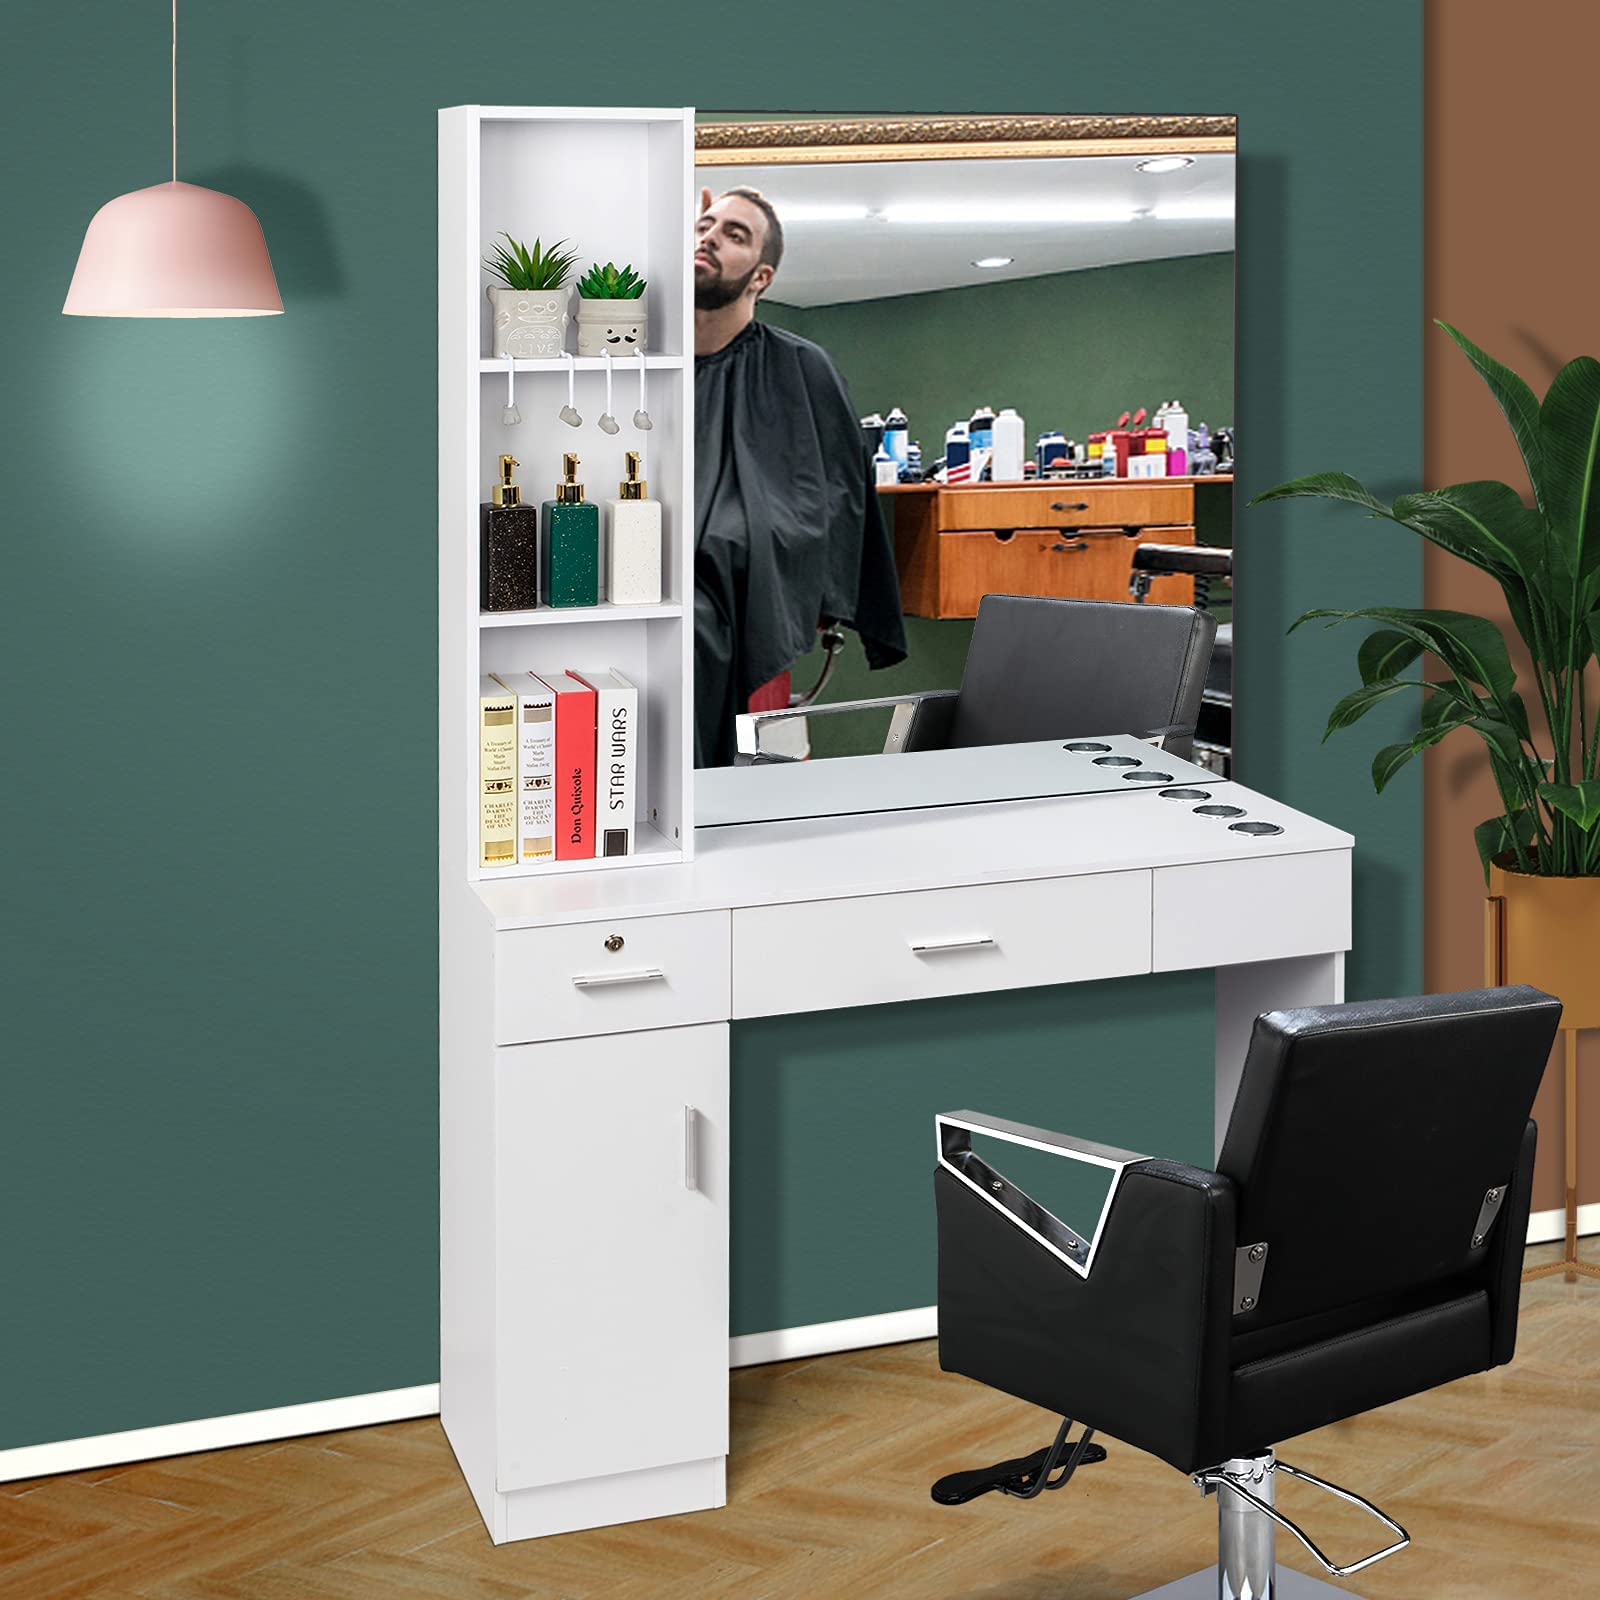 OmySalon Wall Mount Barber Station with Mirror, Support Leg & Mirror Black/Red & Black